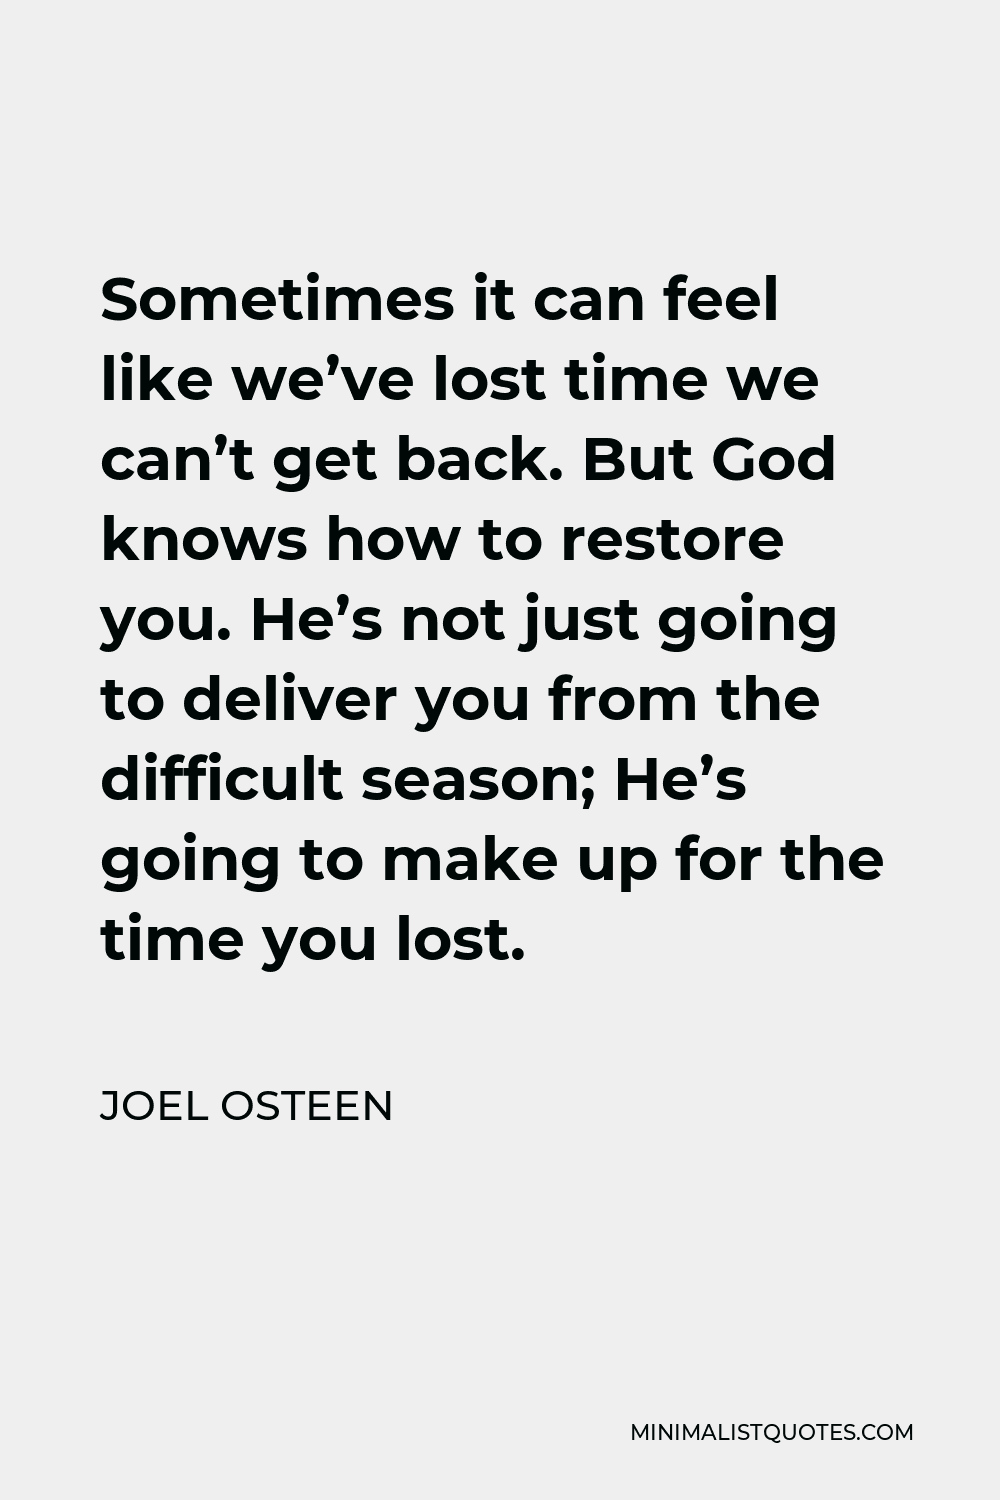 Joel Osteen Quote - Sometimes it can feel like we’ve lost time we can’t get back. But God knows how to restore you. He’s not just going to deliver you from the difficult season; He’s going to make up for the time you lost.